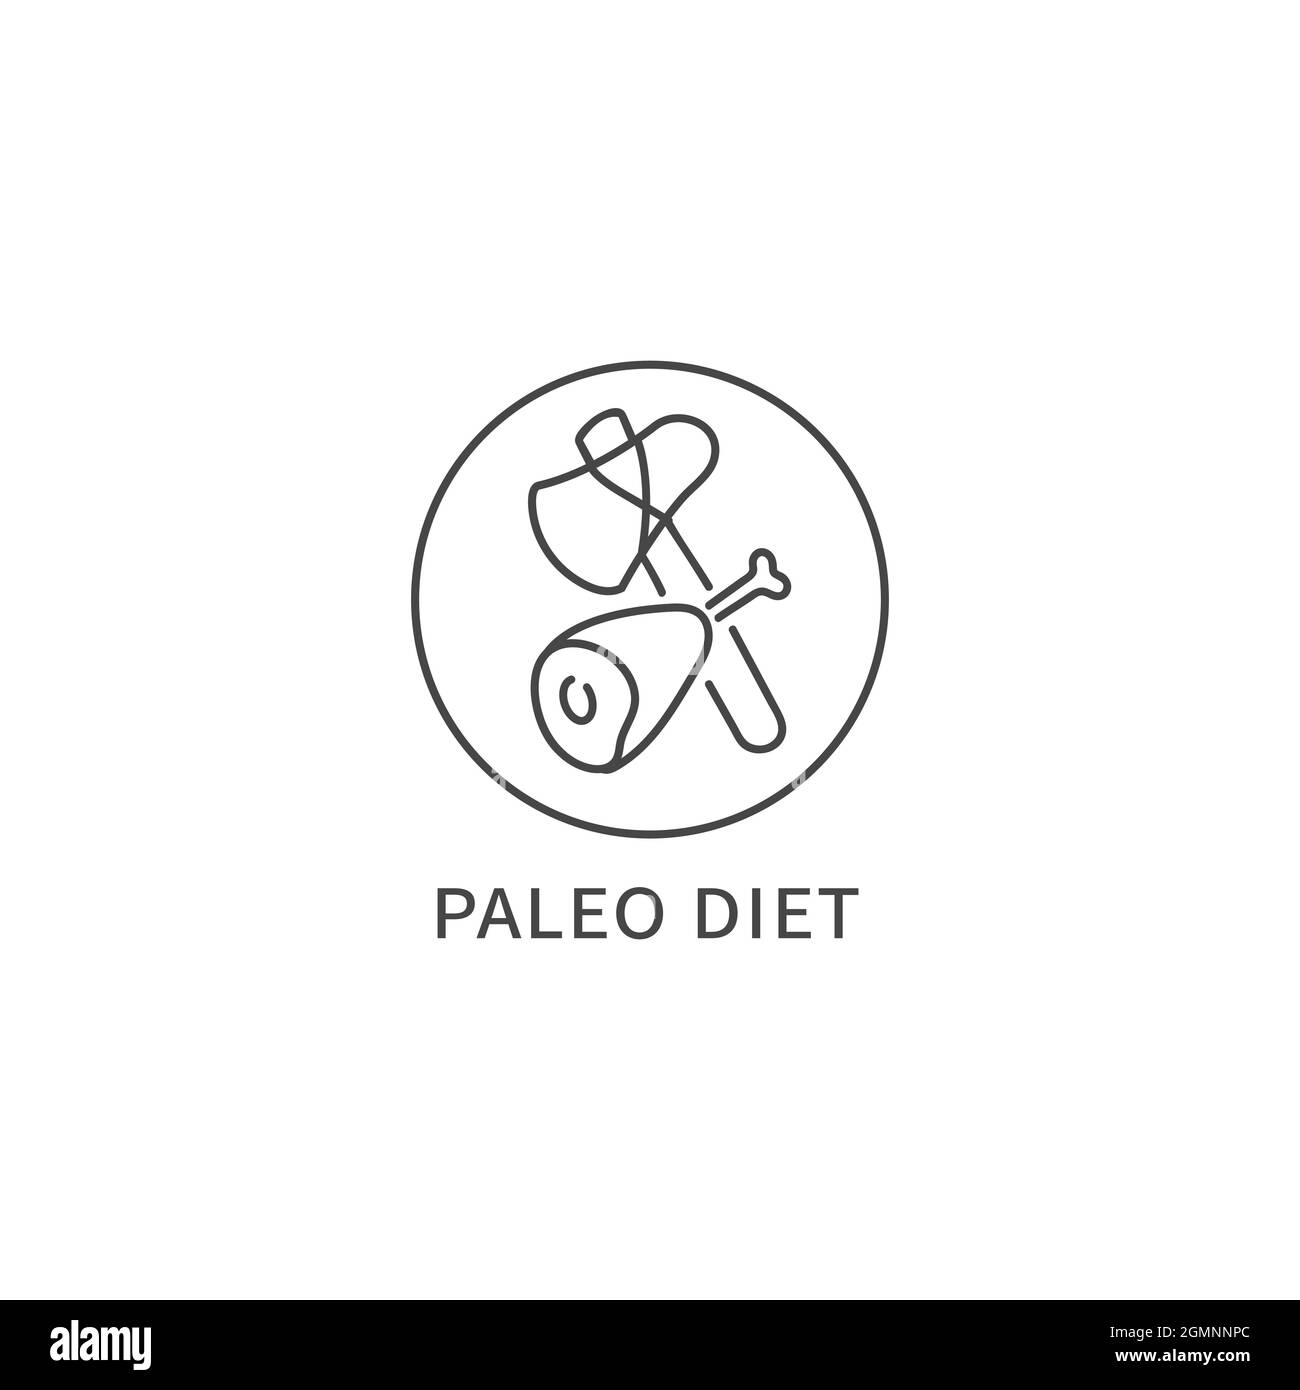 Vector line logo, badge or icon - paleo diet. Symbol of healthy eating. Stock Vector